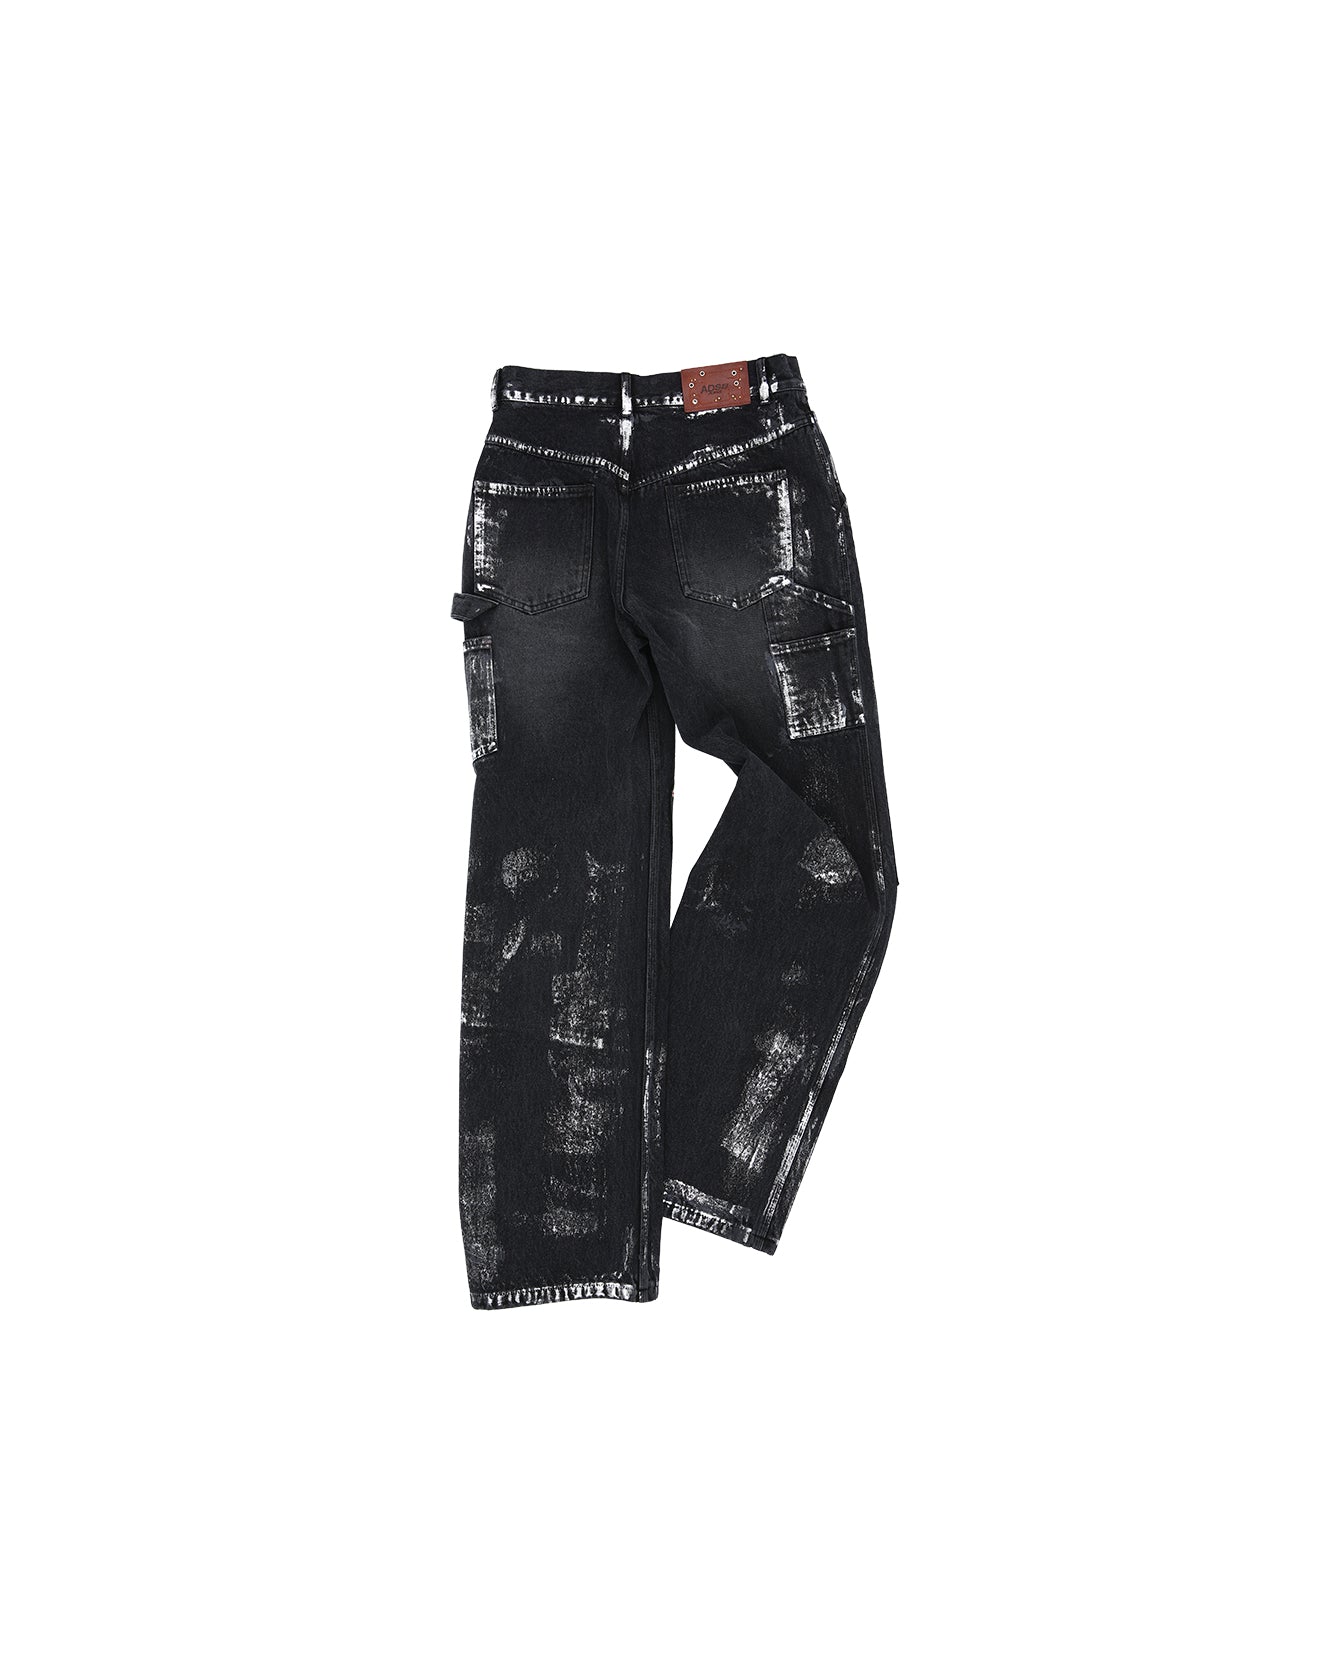 COATED CARPENTER WAX JEANS – Bell apa685m(BLACK) WIDE-LEG Andersson